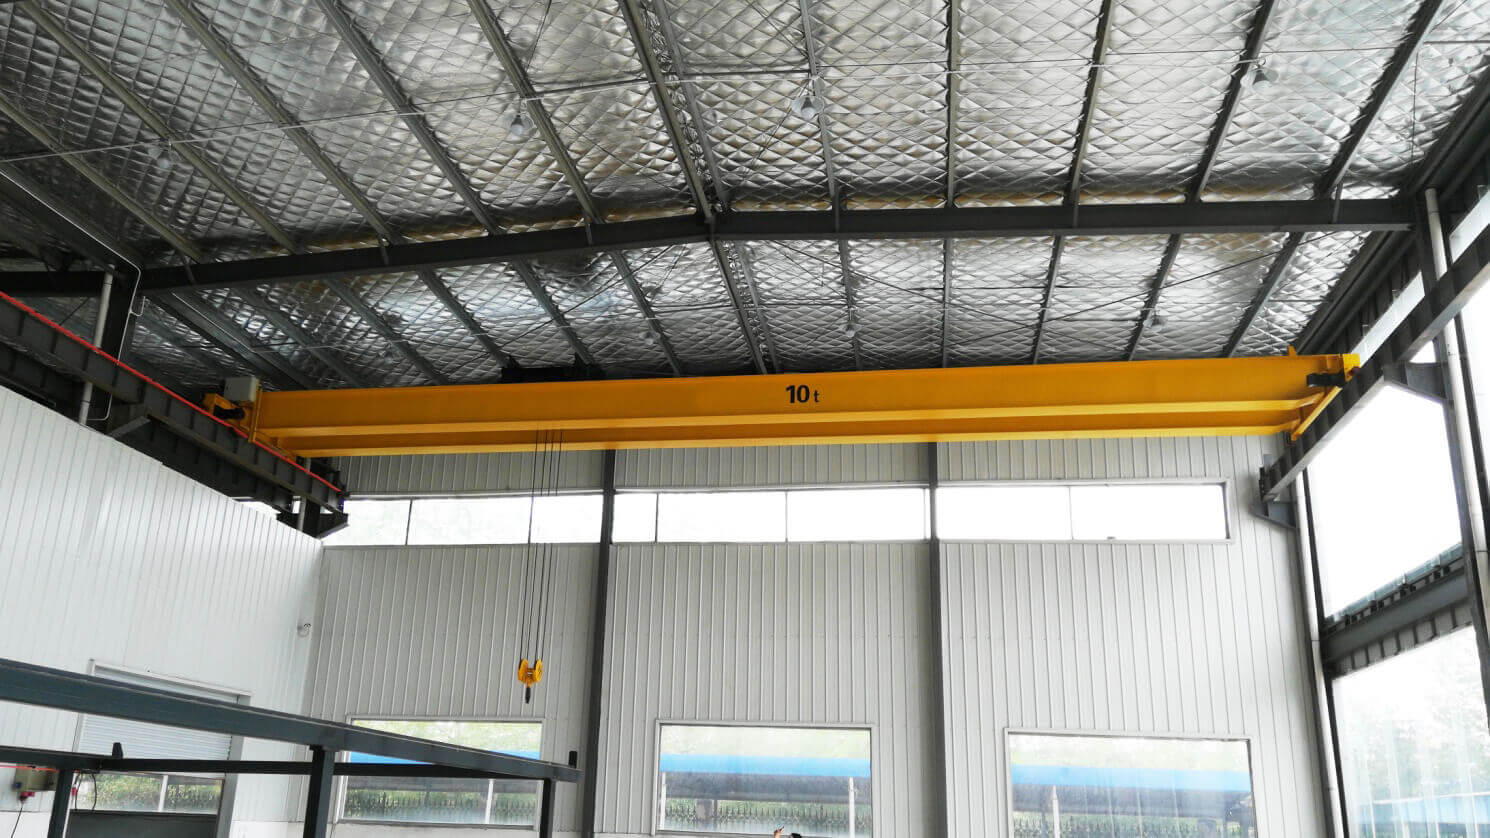 Quote for Europe type 25t double girder overhead crane-29.jpg